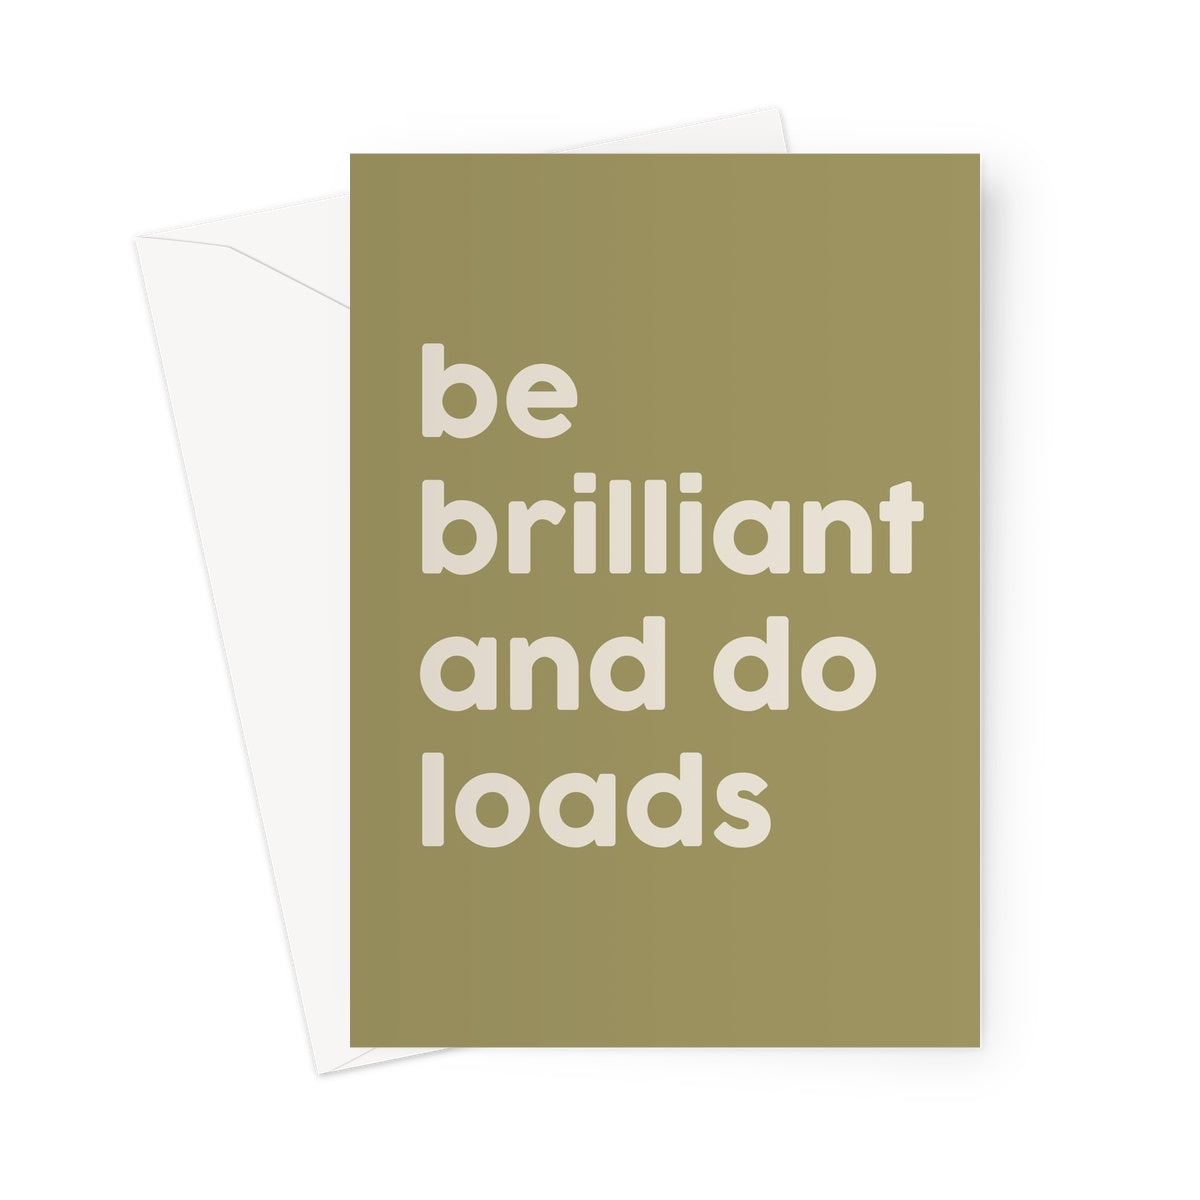 BE BRILLIANT AND DO LOADS - Olive / Stone Greeting Card